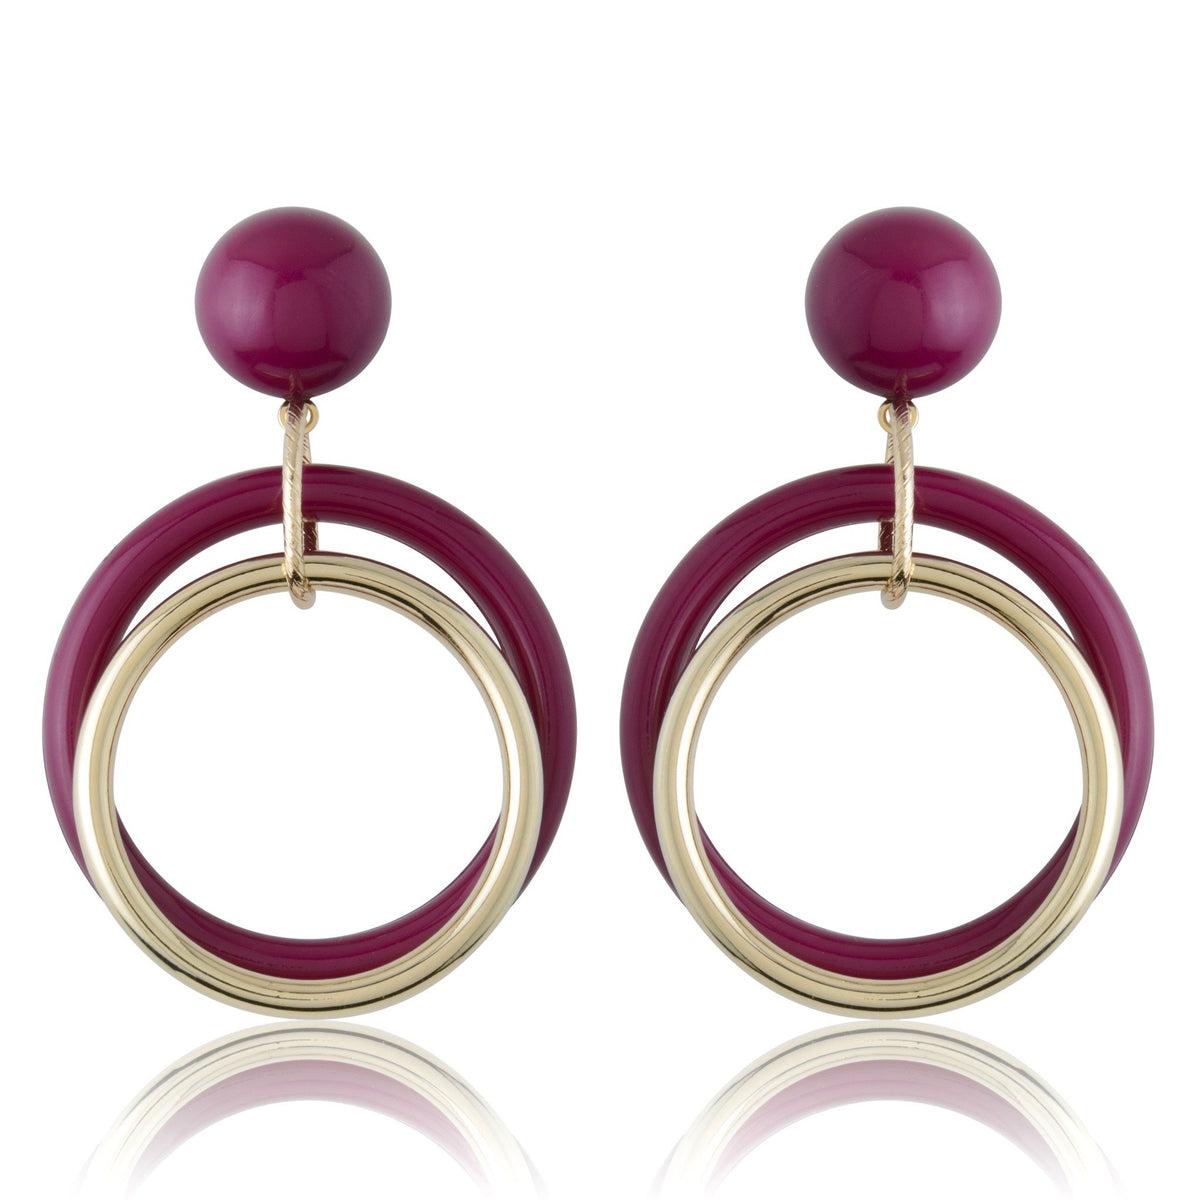 Magneta & Gold Stud + Concentric Earrings